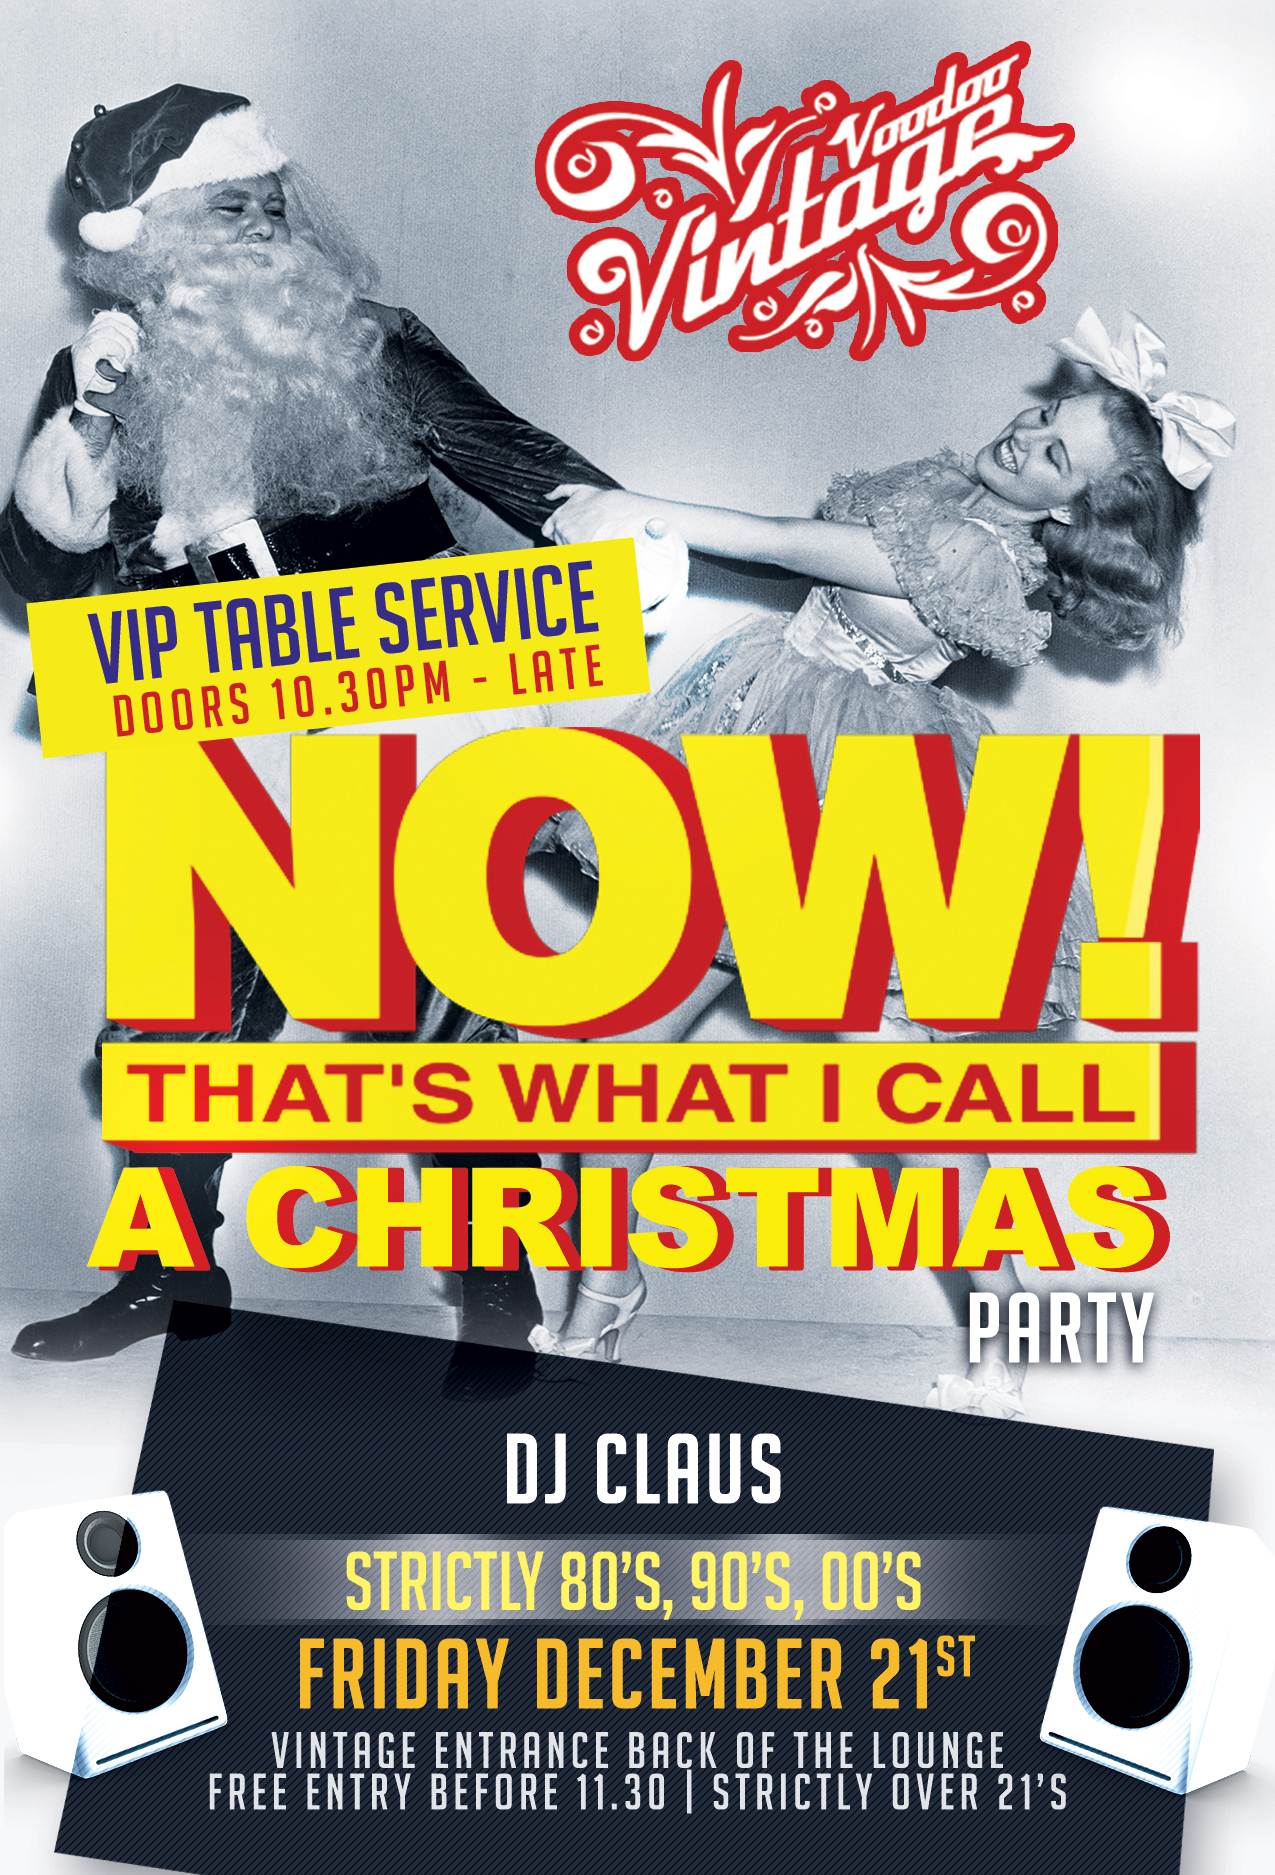 voodoo-vintage-now-thats-what-i-call-A-CHJRISTMAS-PARTY-fri-dec-21-2018.jpg